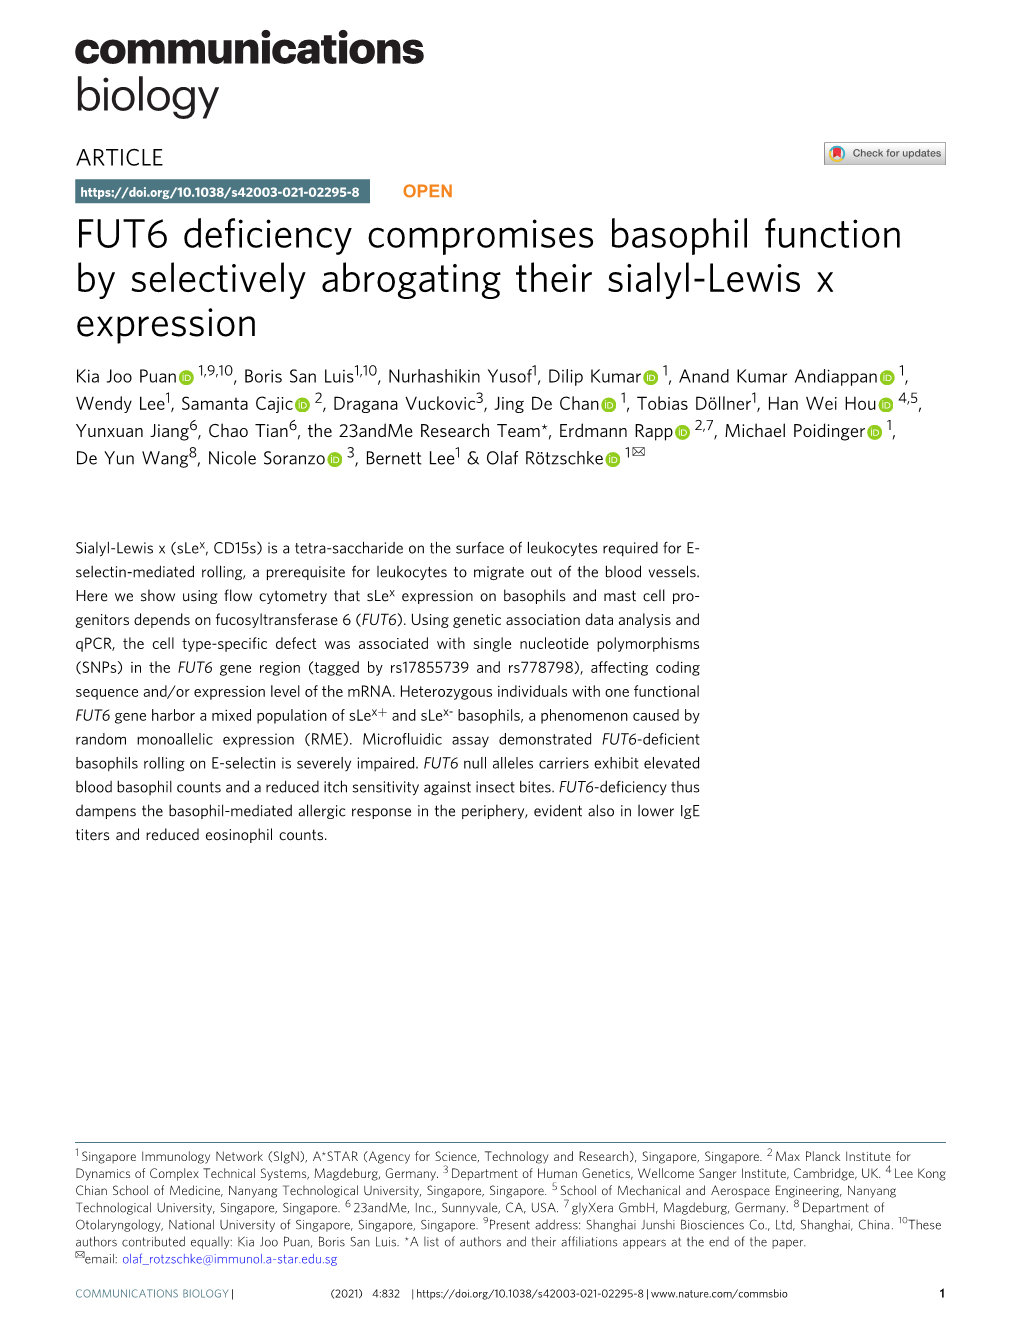 FUT6 Deficiency Compromises Basophil Function by Selectively